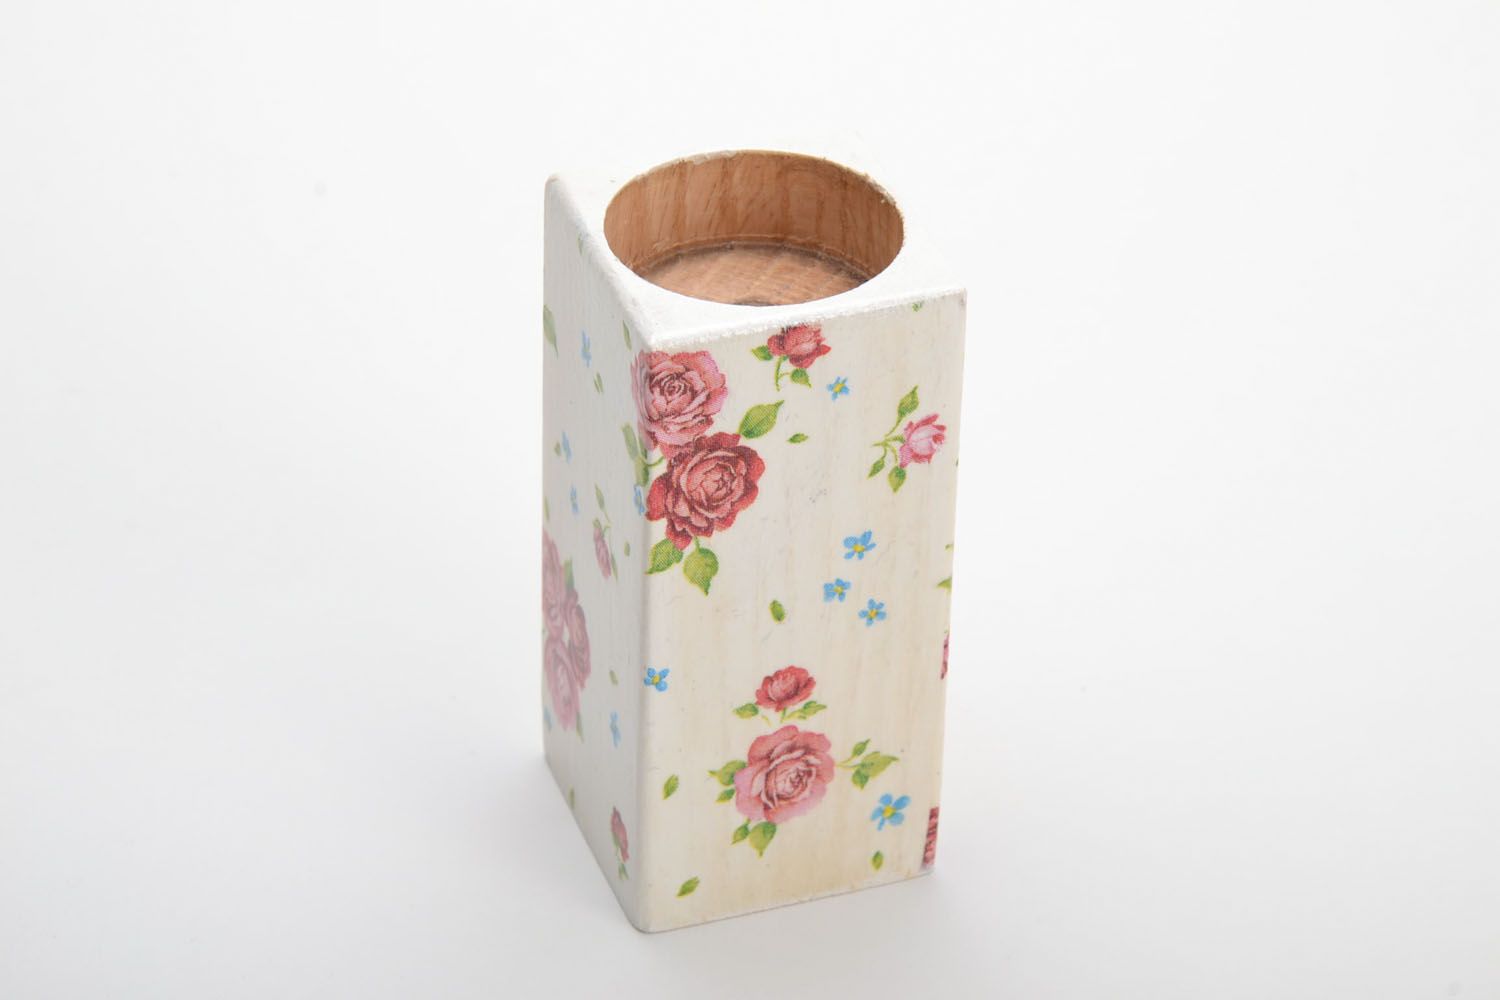 Decoupage wooden candle holder photo 4